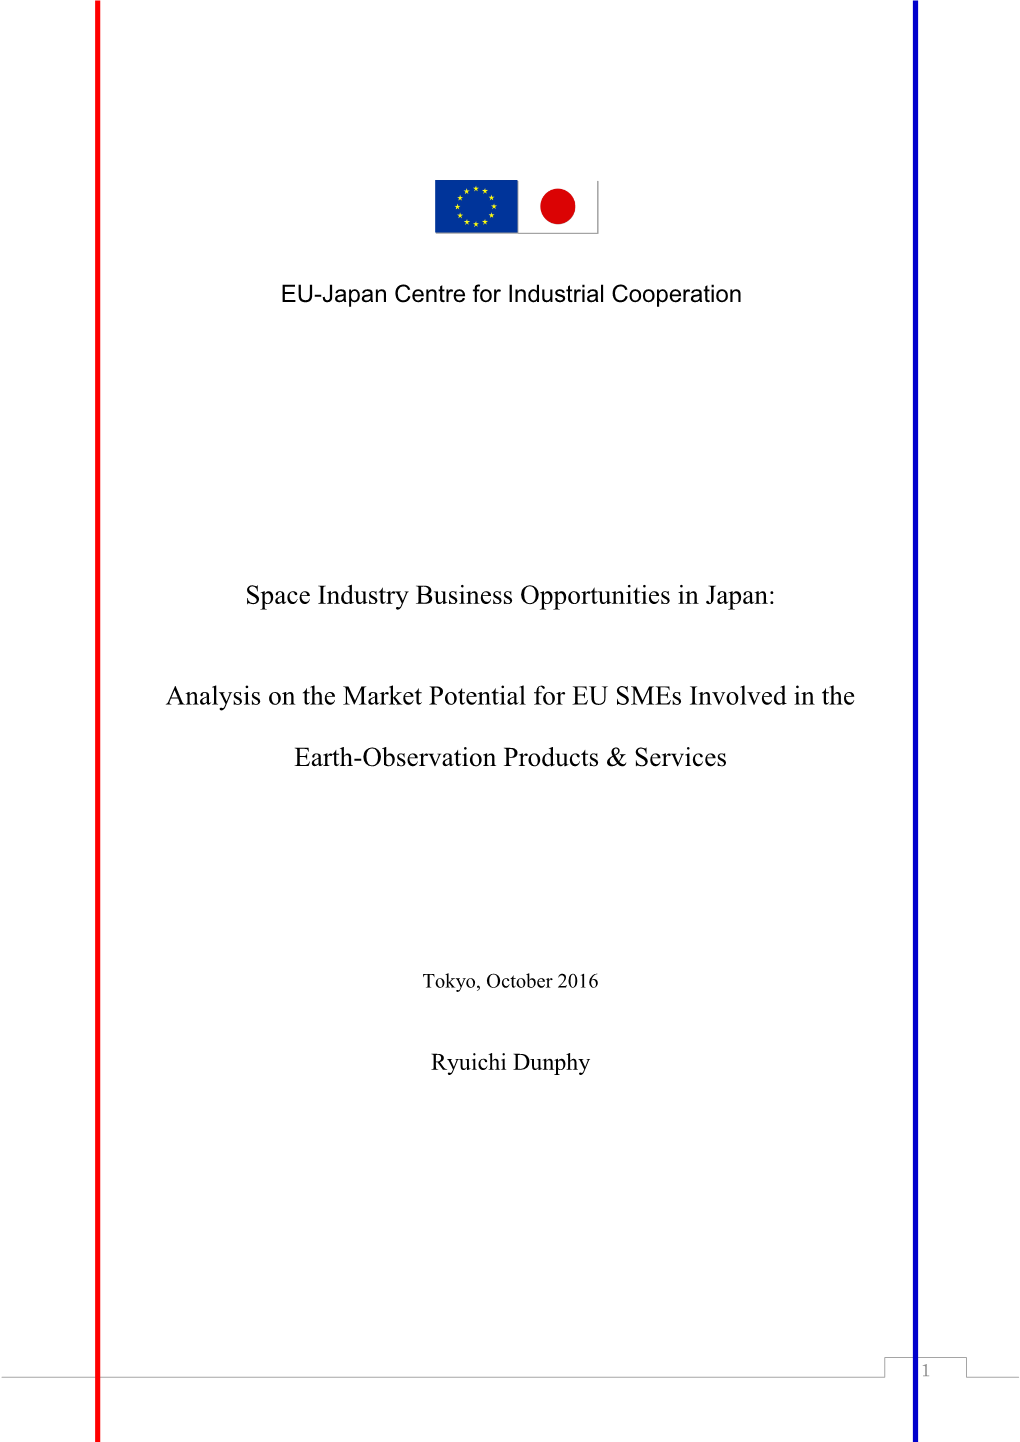 Space Industry Business Opportunities in Japan